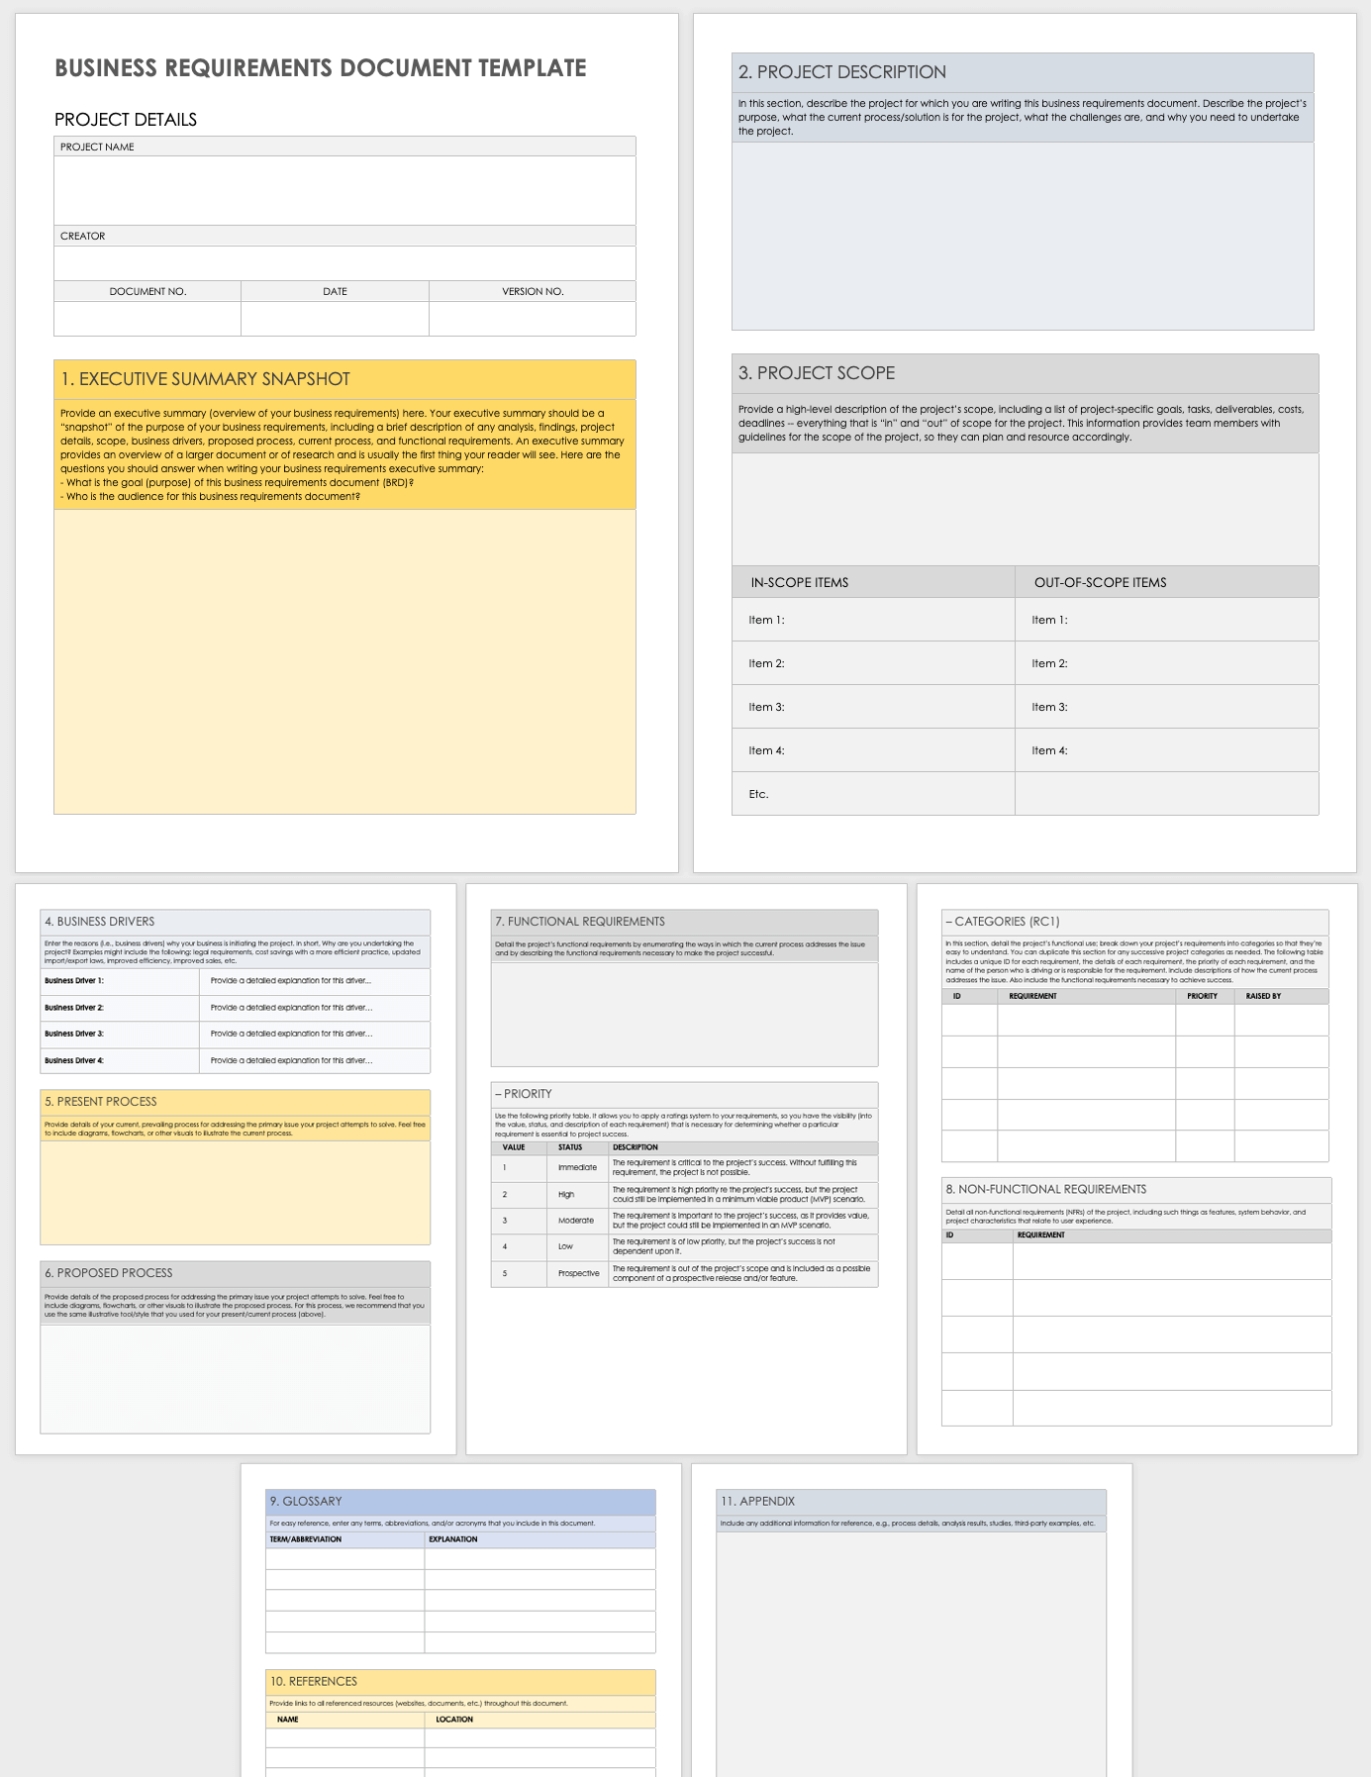 Download Free Brd Templates | Smartsheet Throughout Sample Business Requirement Document Template